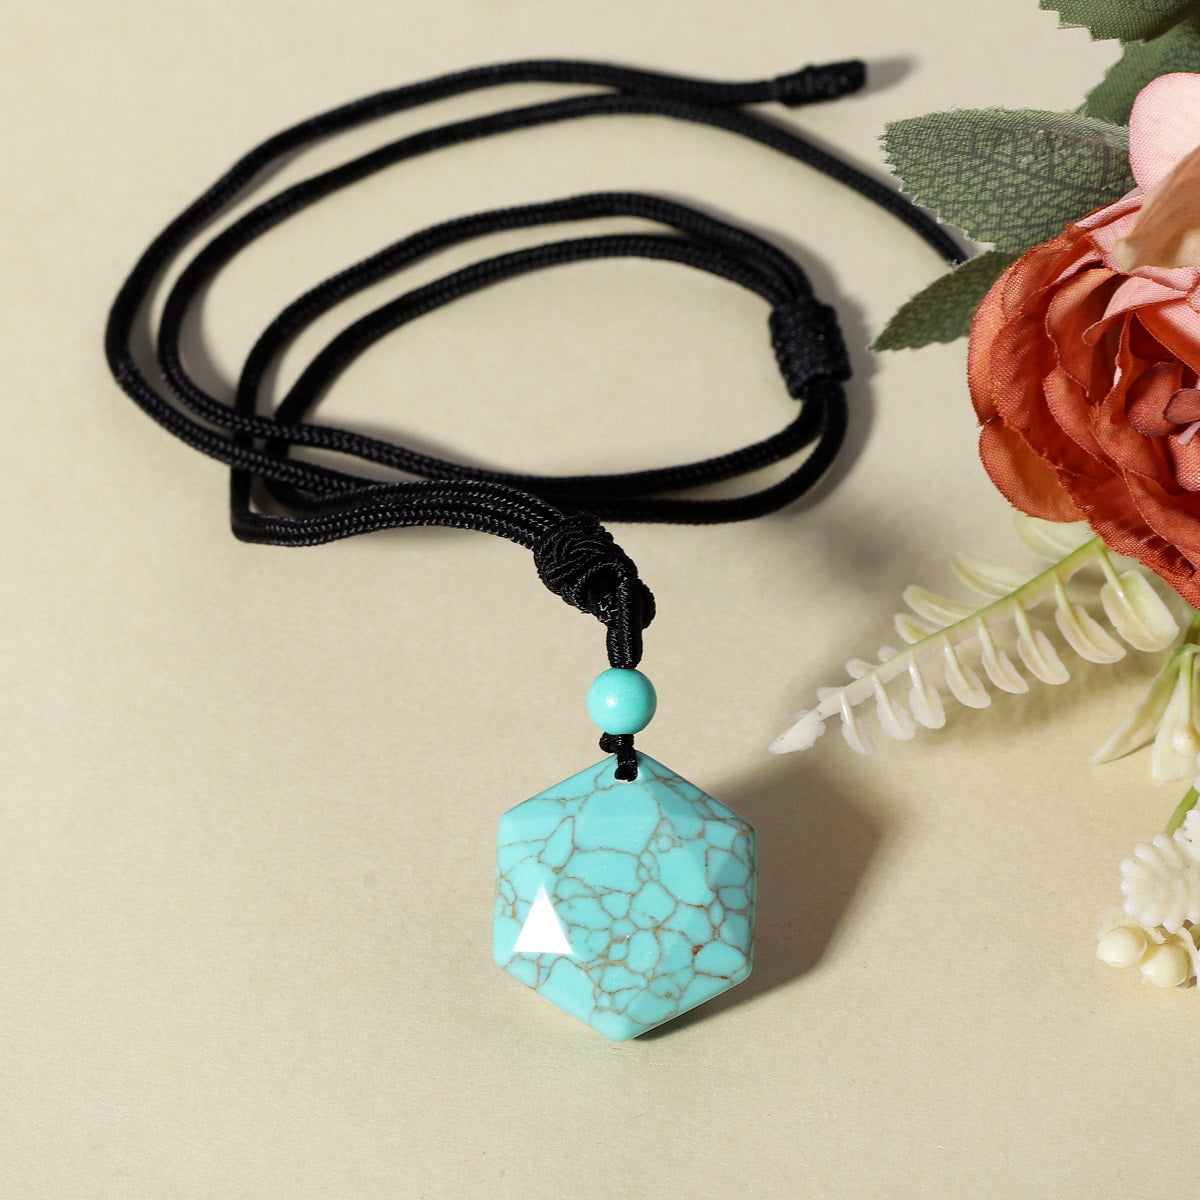 A detailed view of the artistic and intricate wrapping design that surrounds the turquoise gemstone, adding a touch of elegance to the pendant necklace.